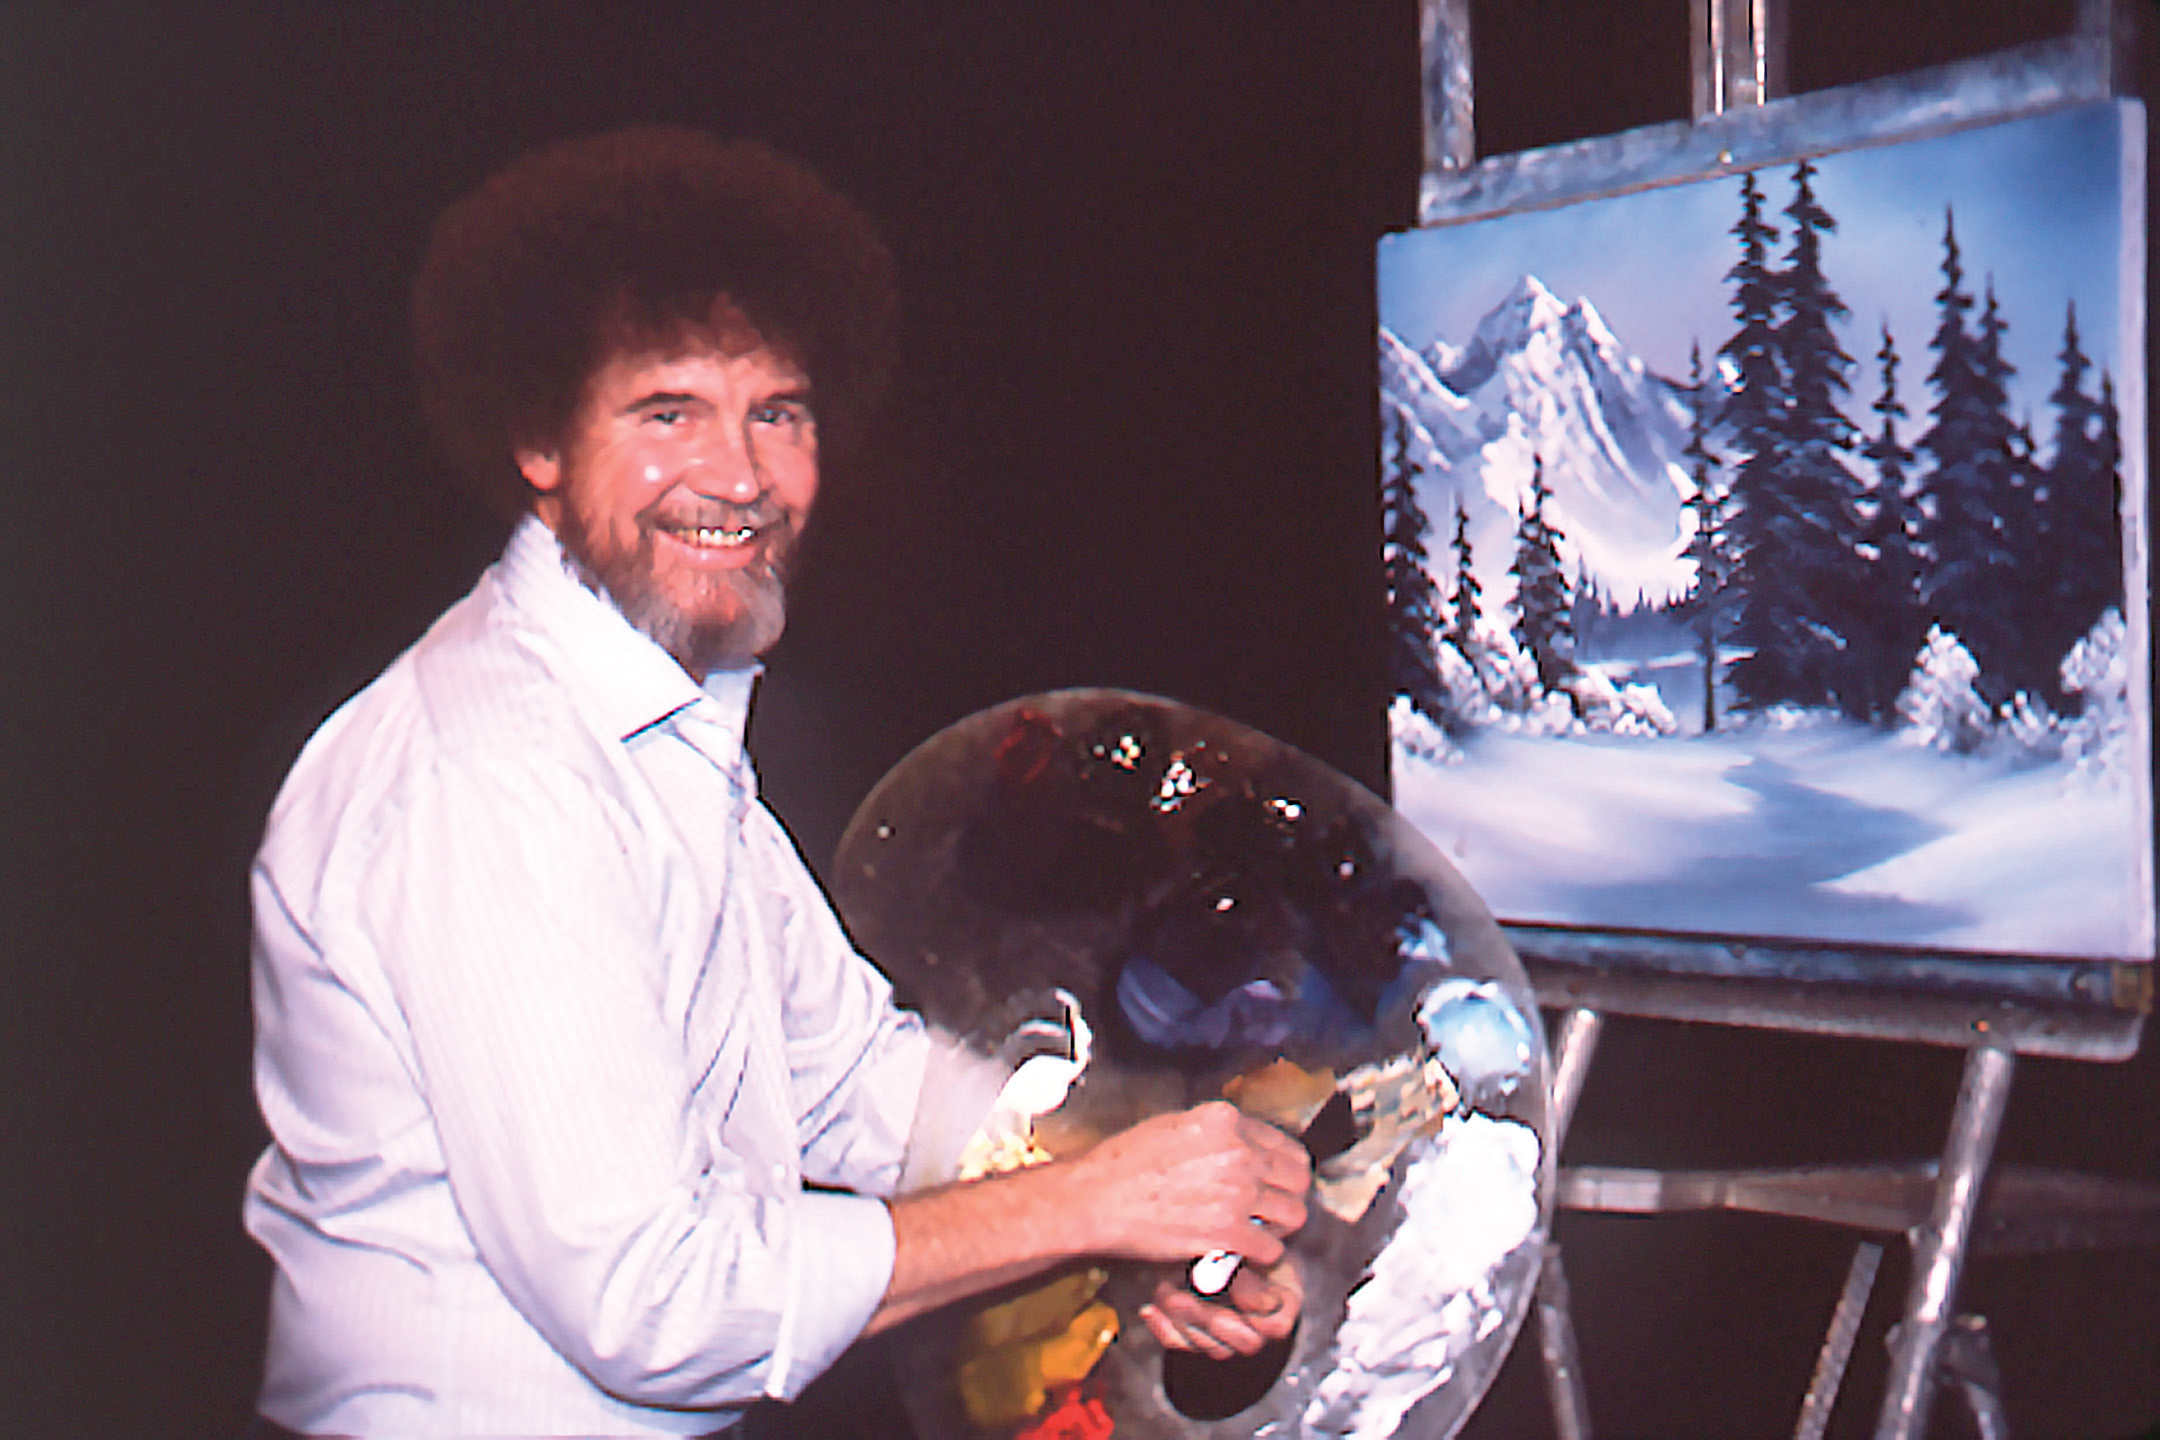 What Bob Ross Was Like Before The Fame